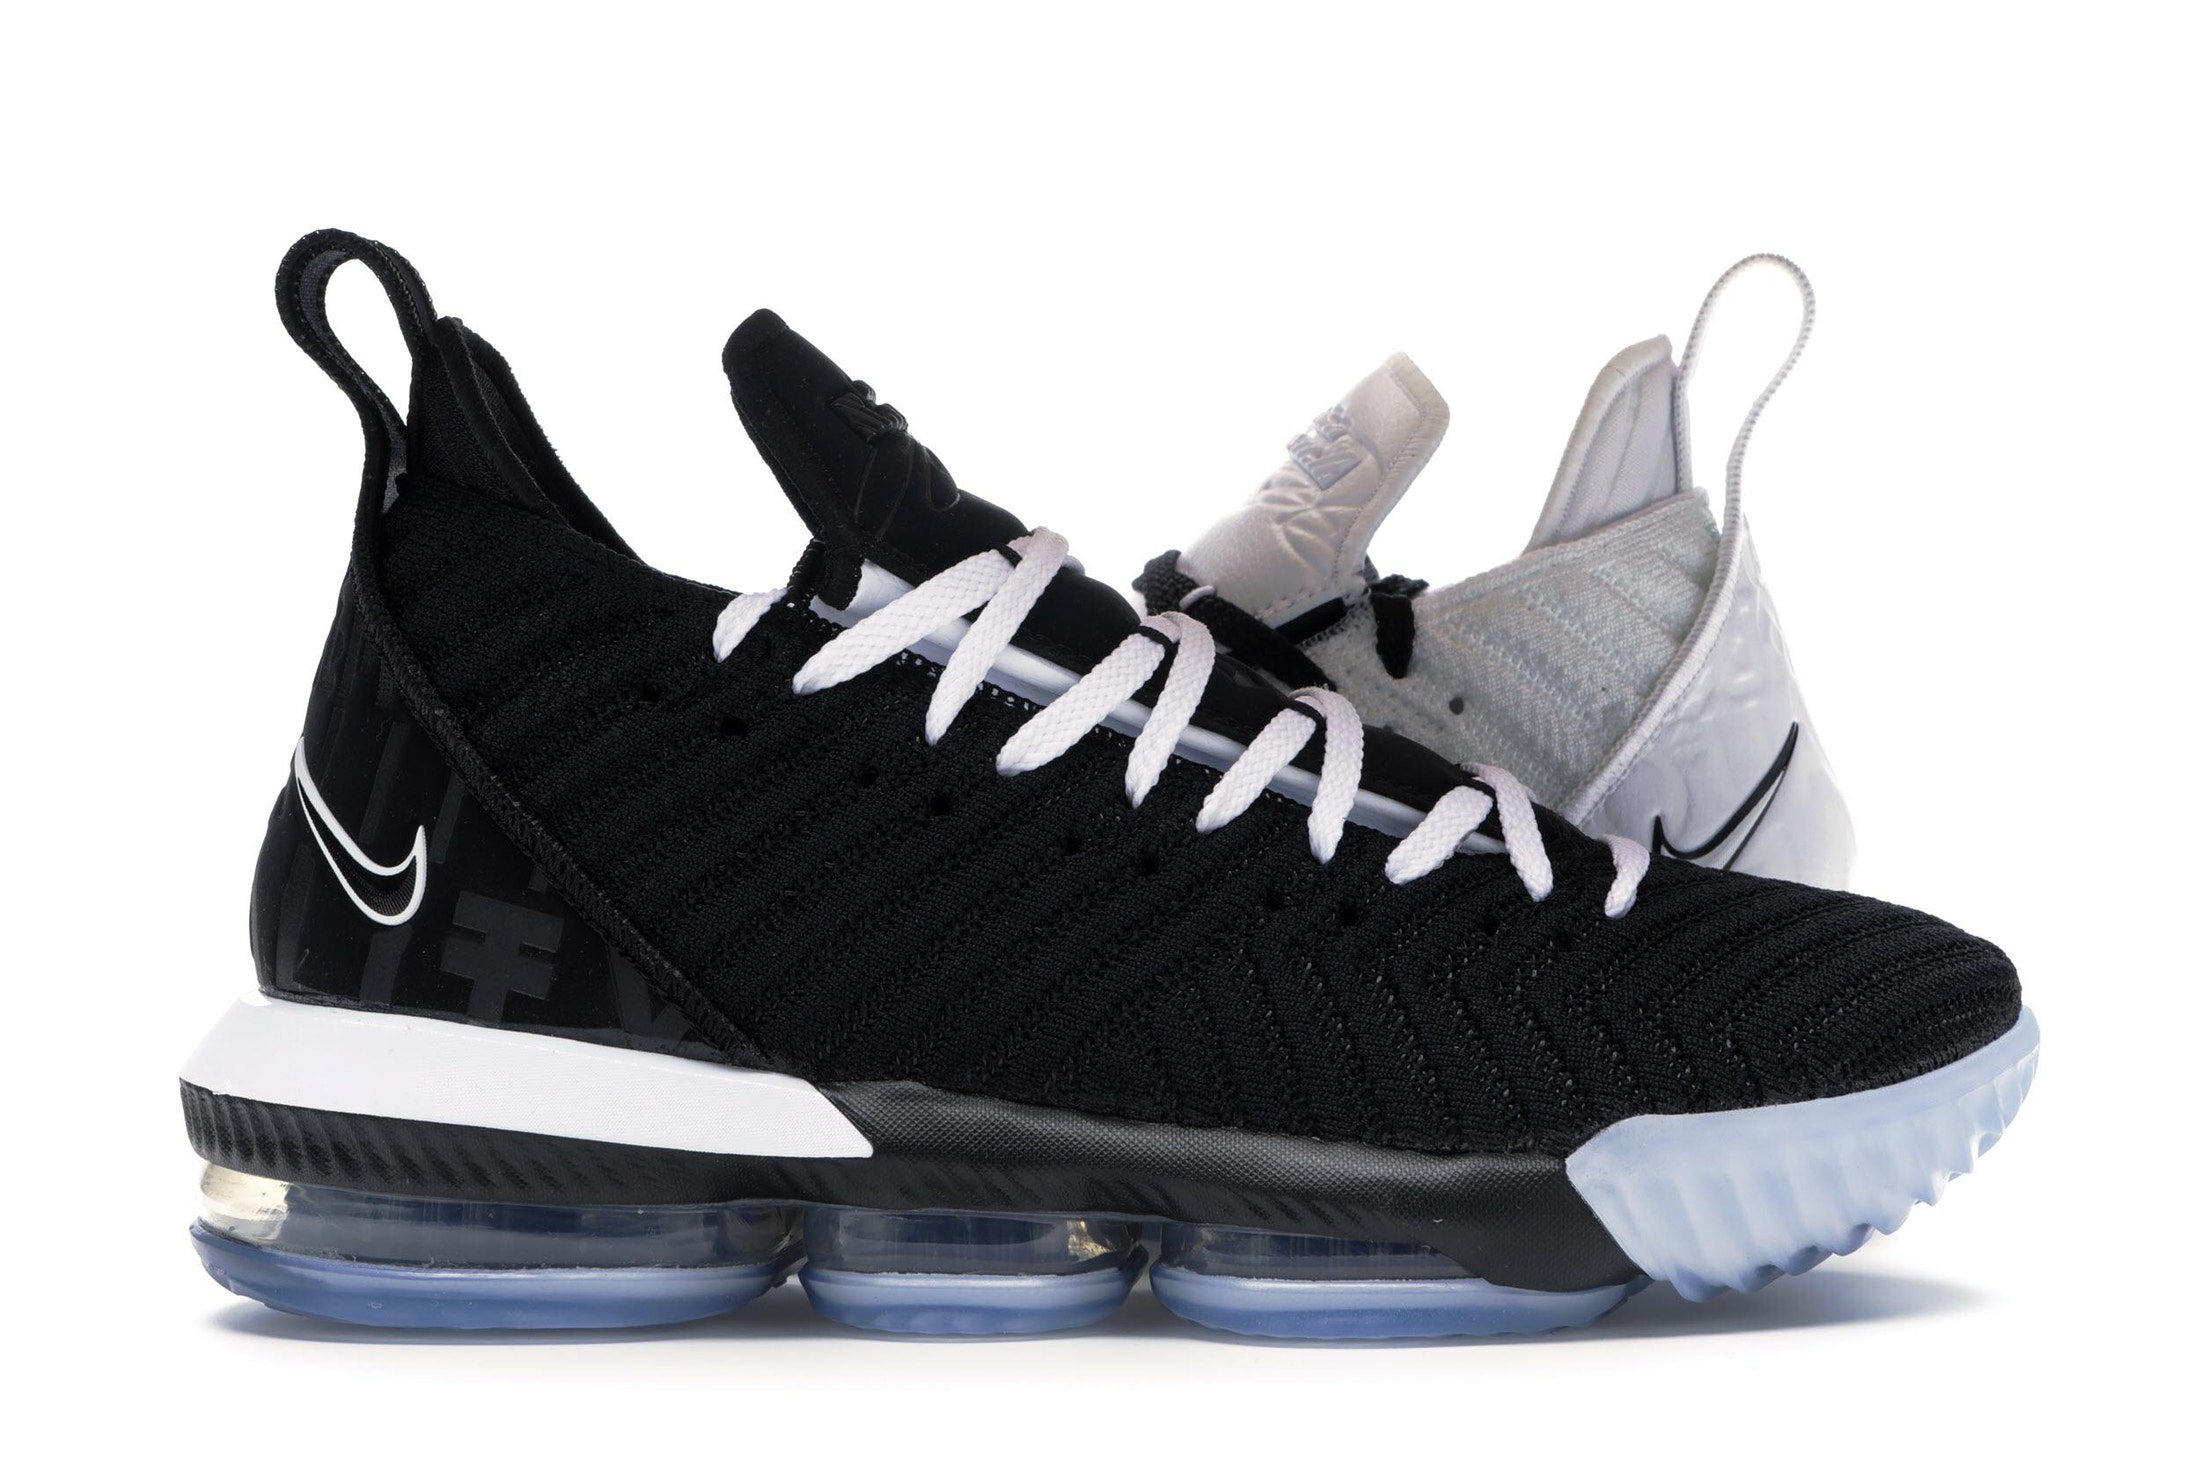 Lebron 16 - All Sizes & Colorways at StockX